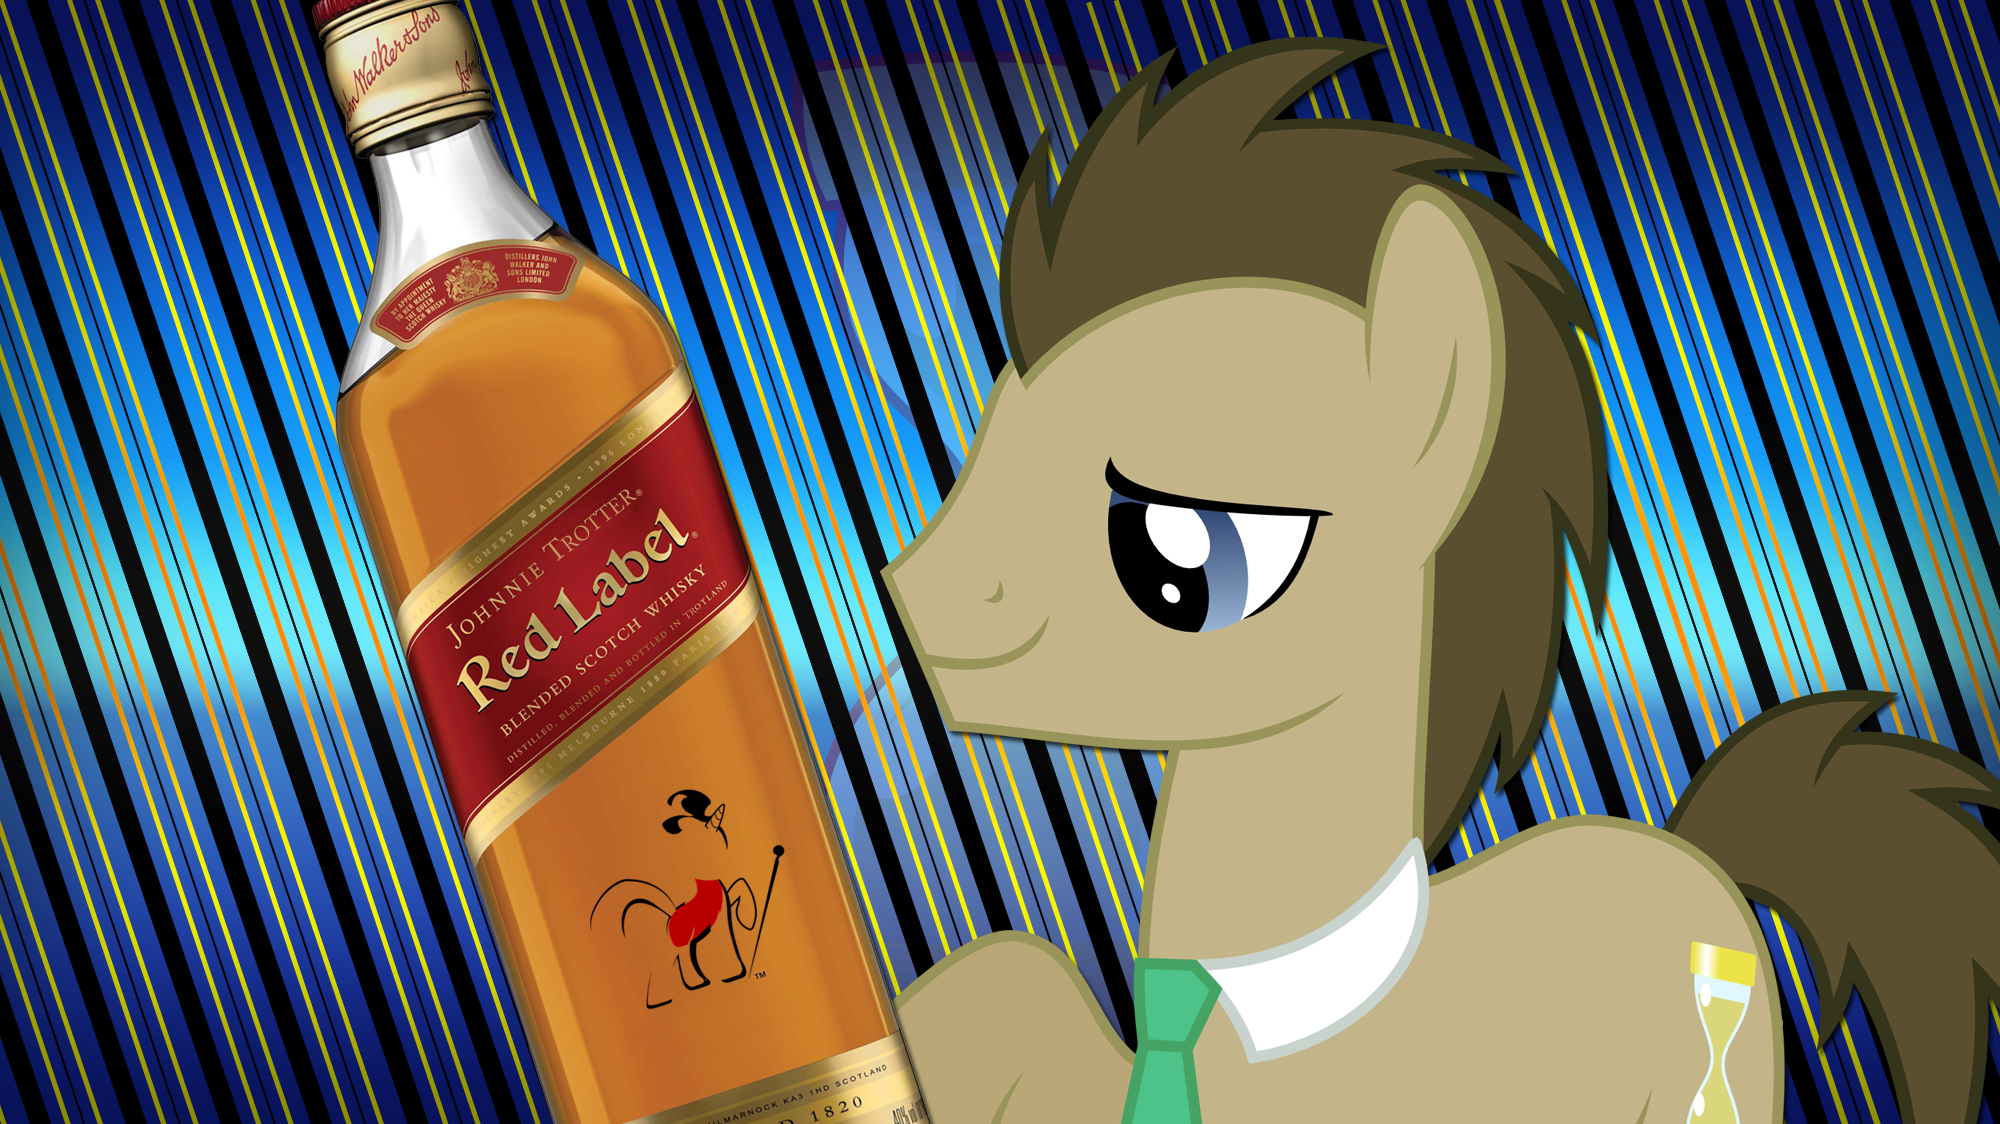 What Do Ponies Drink? - Dr. Whooves by 4Suit and nickman983